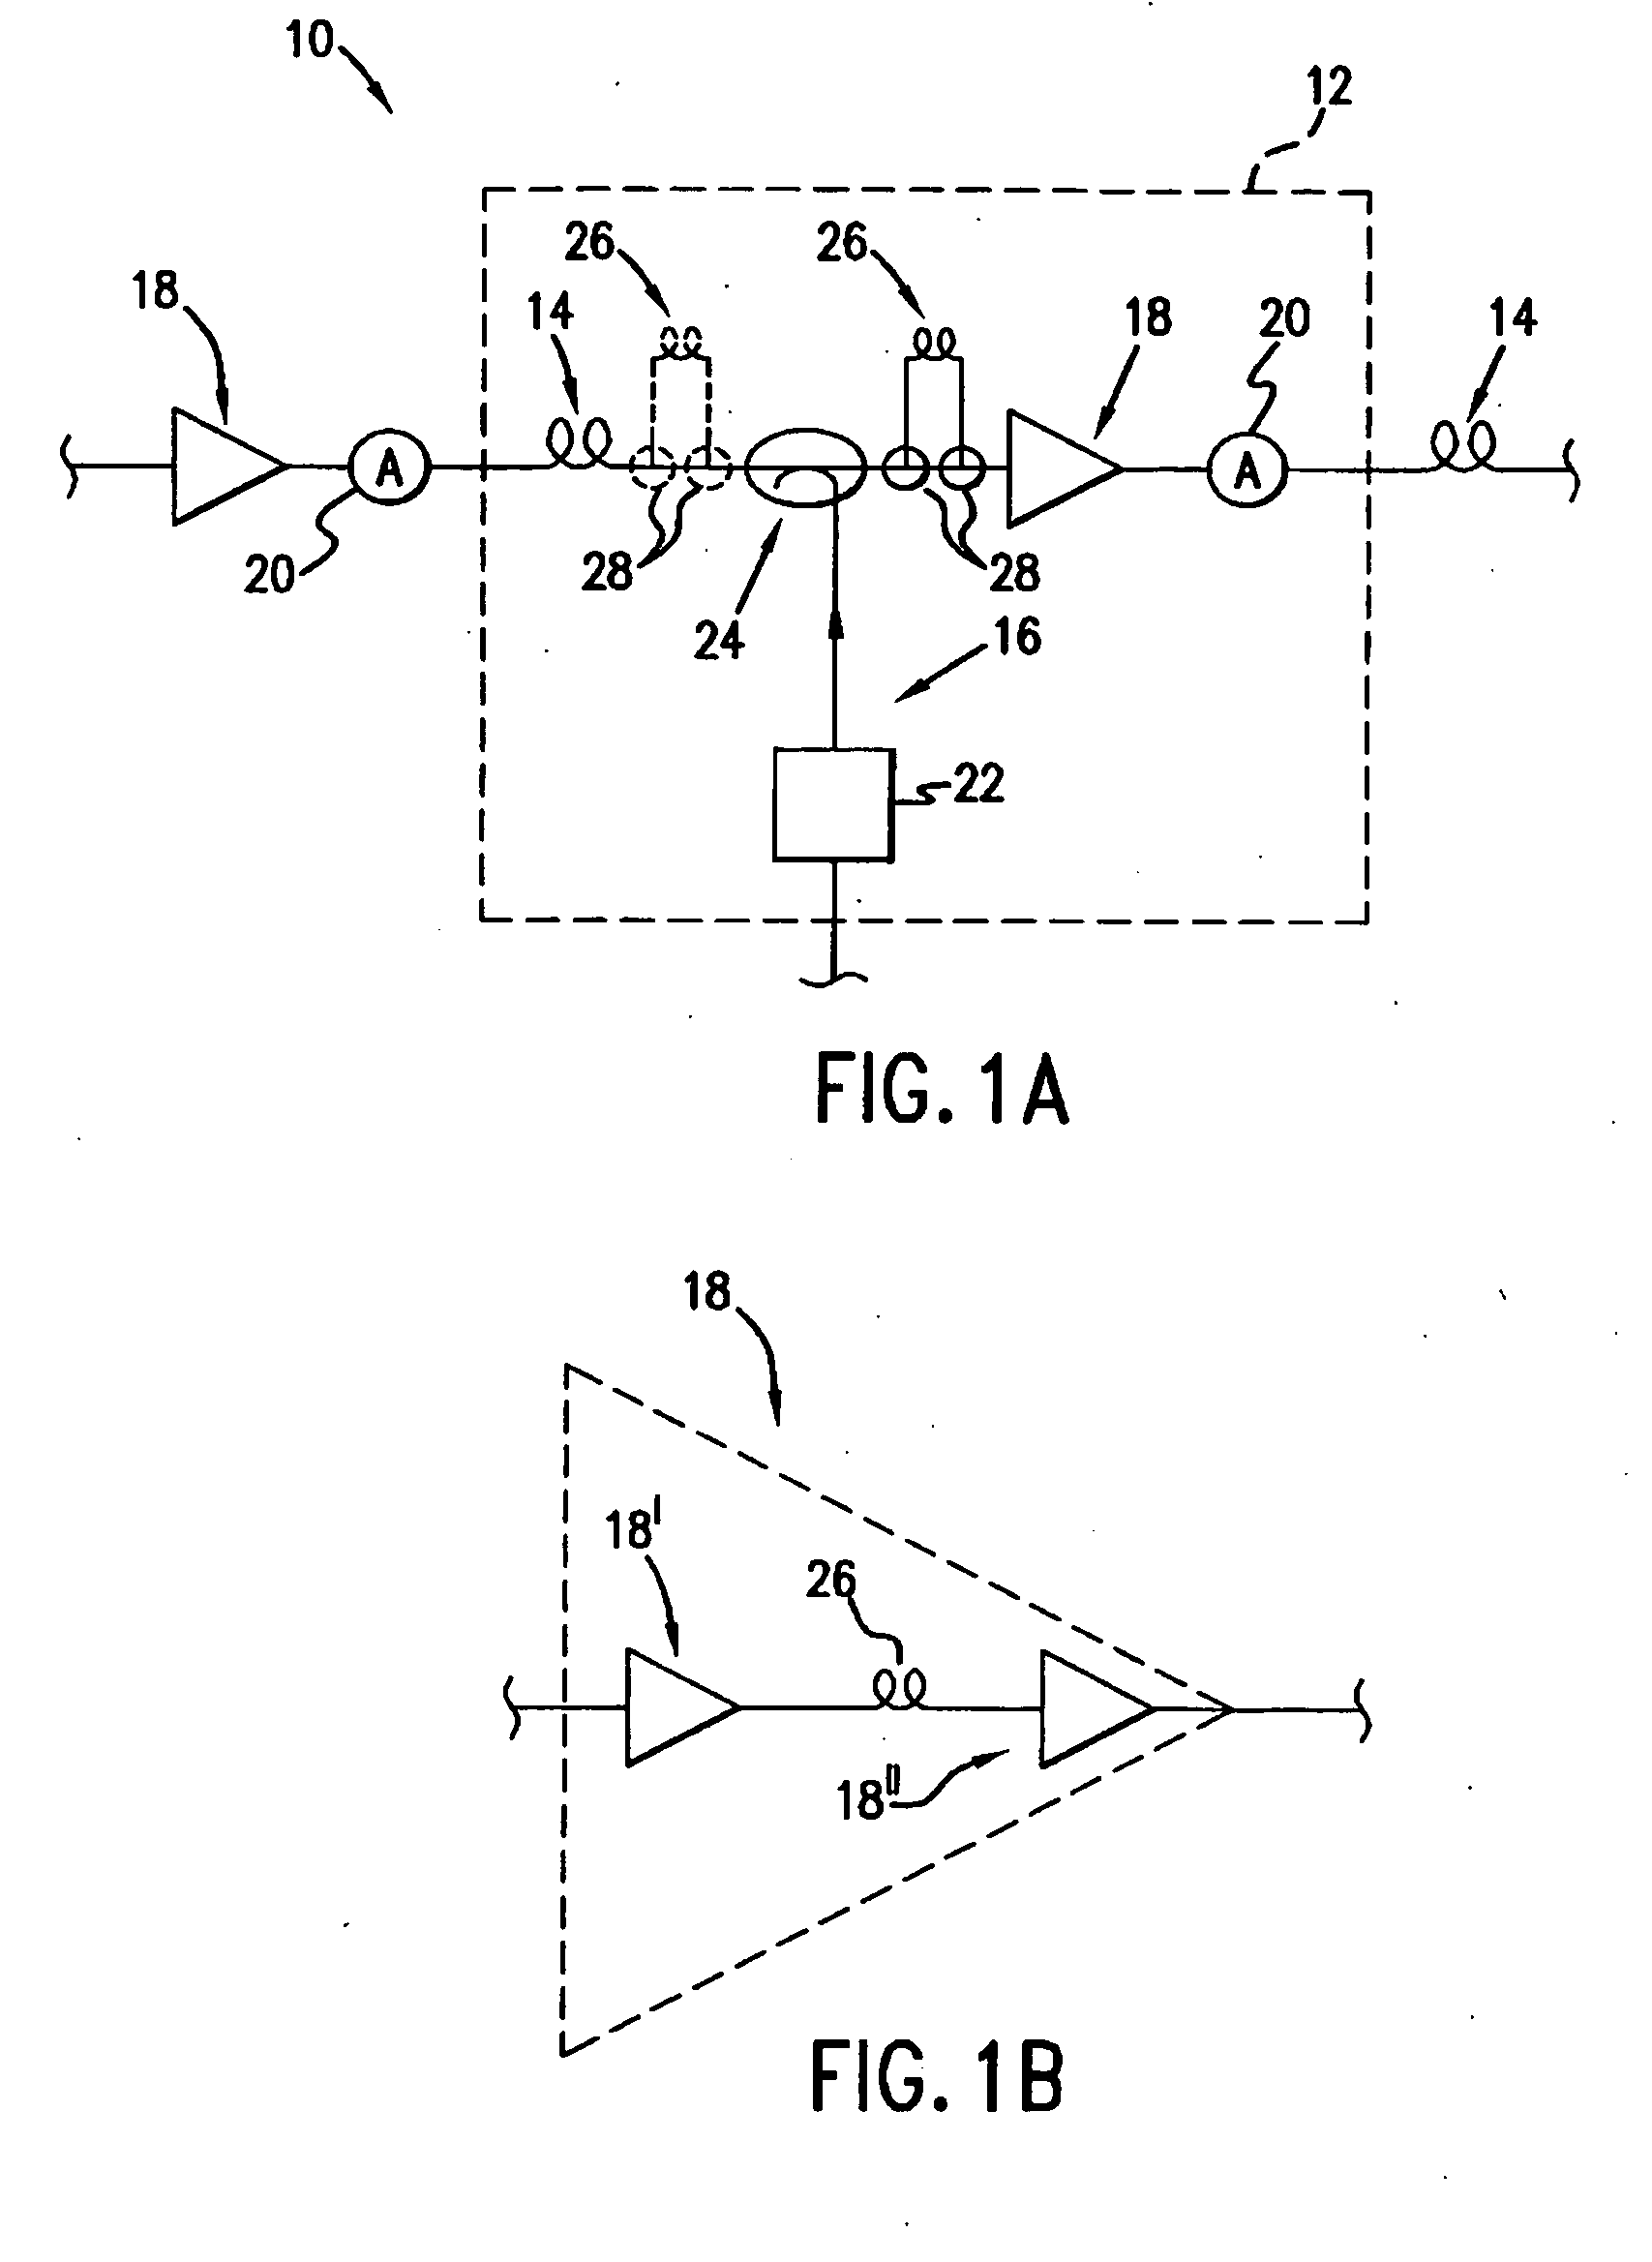 Raman assisted EDFA system and method